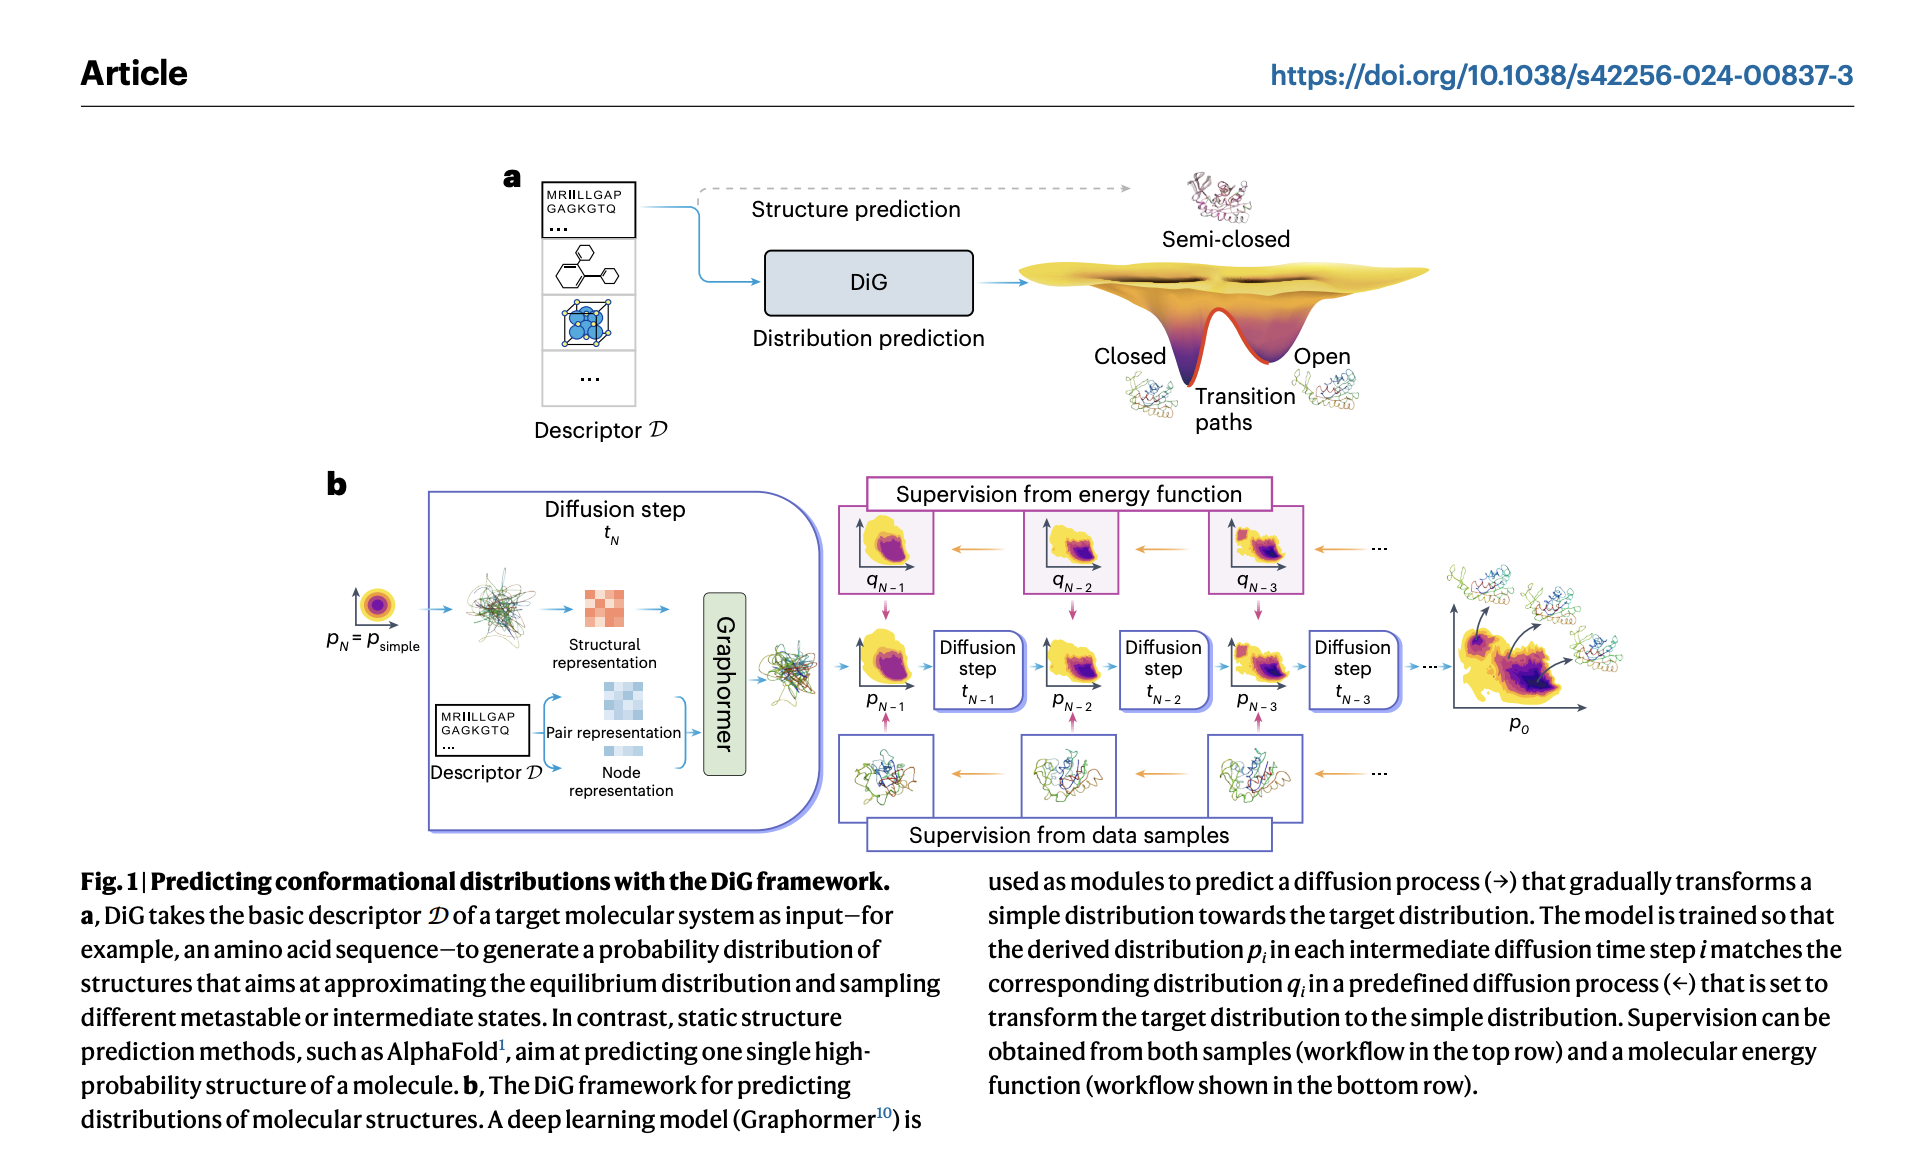  Microsoft Researchers Propose DiG: Transforming Molecular Modeling with Deep Learning for Equilibrium Distribution Prediction